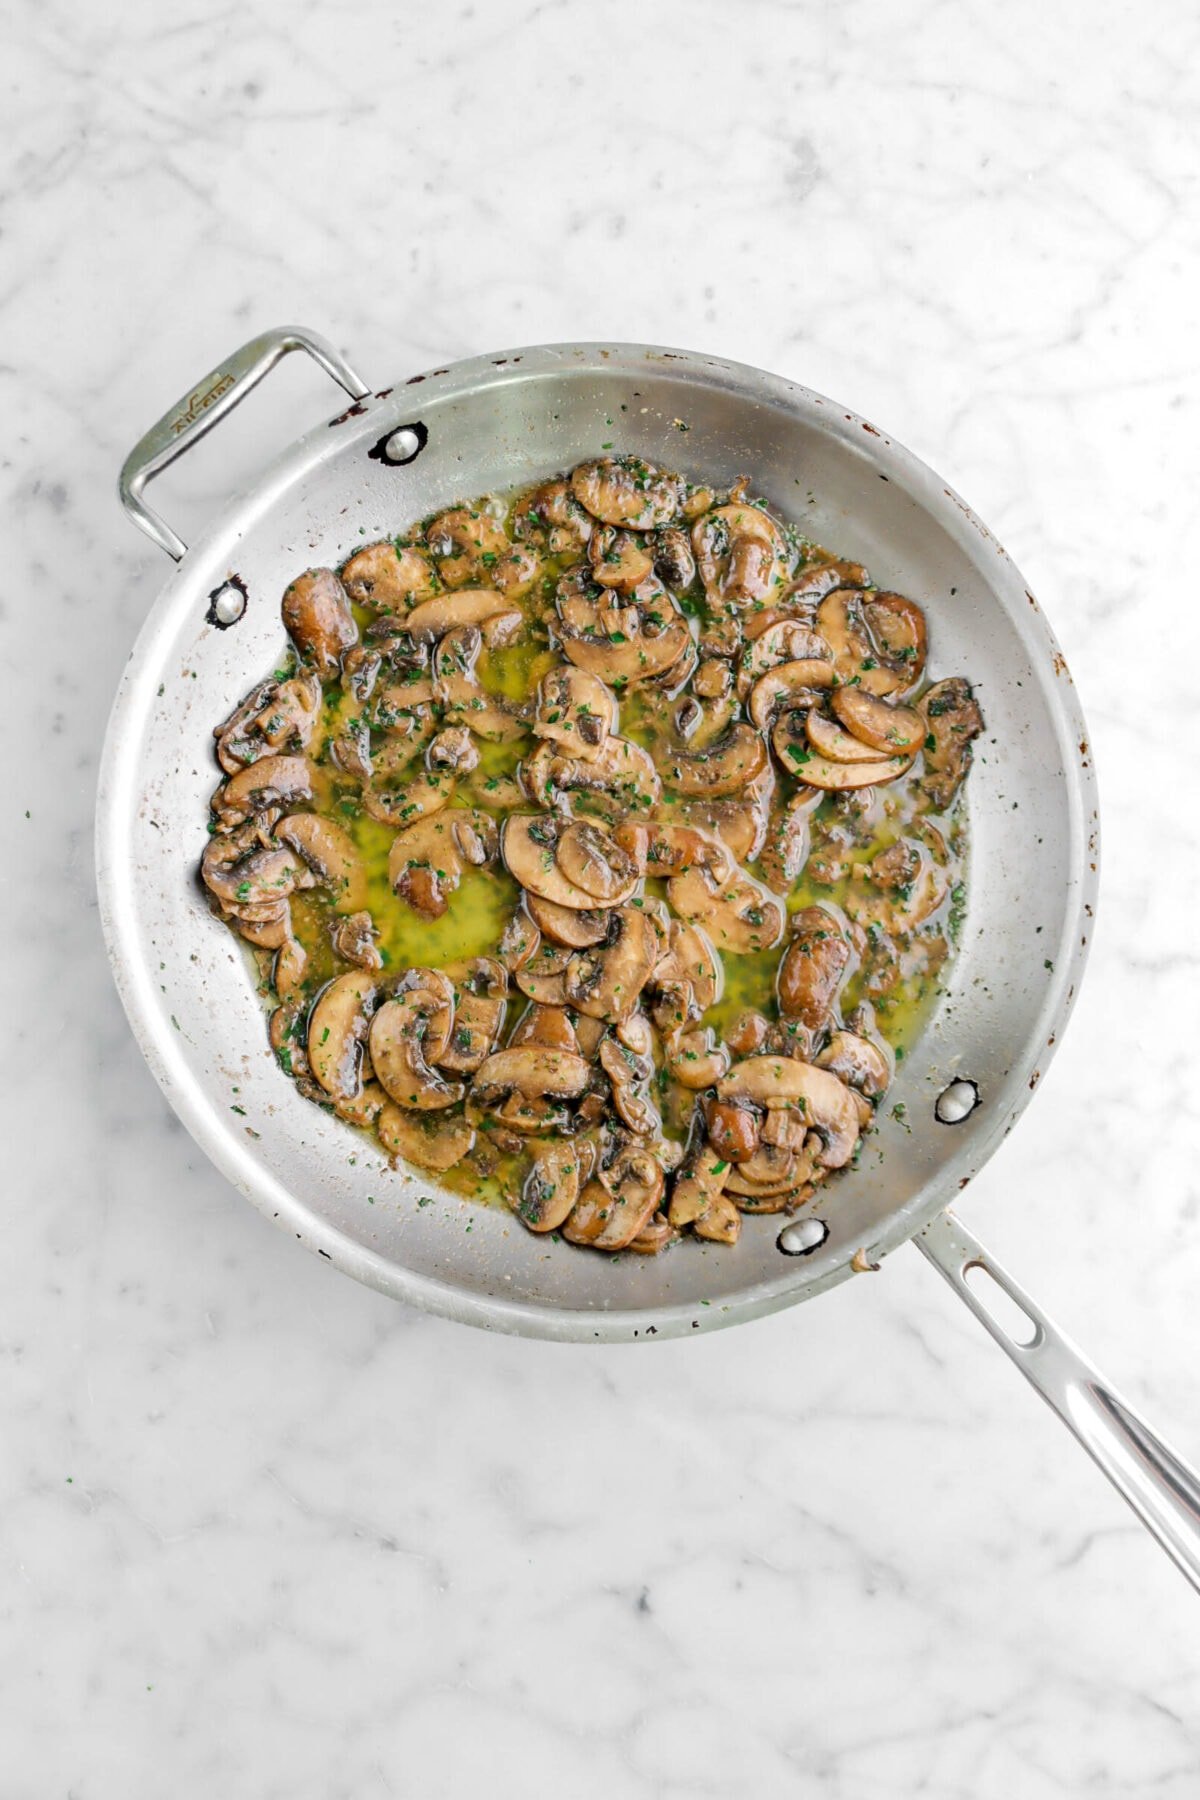 Sautéed mushrooms and herbs in skillet on marble surface.